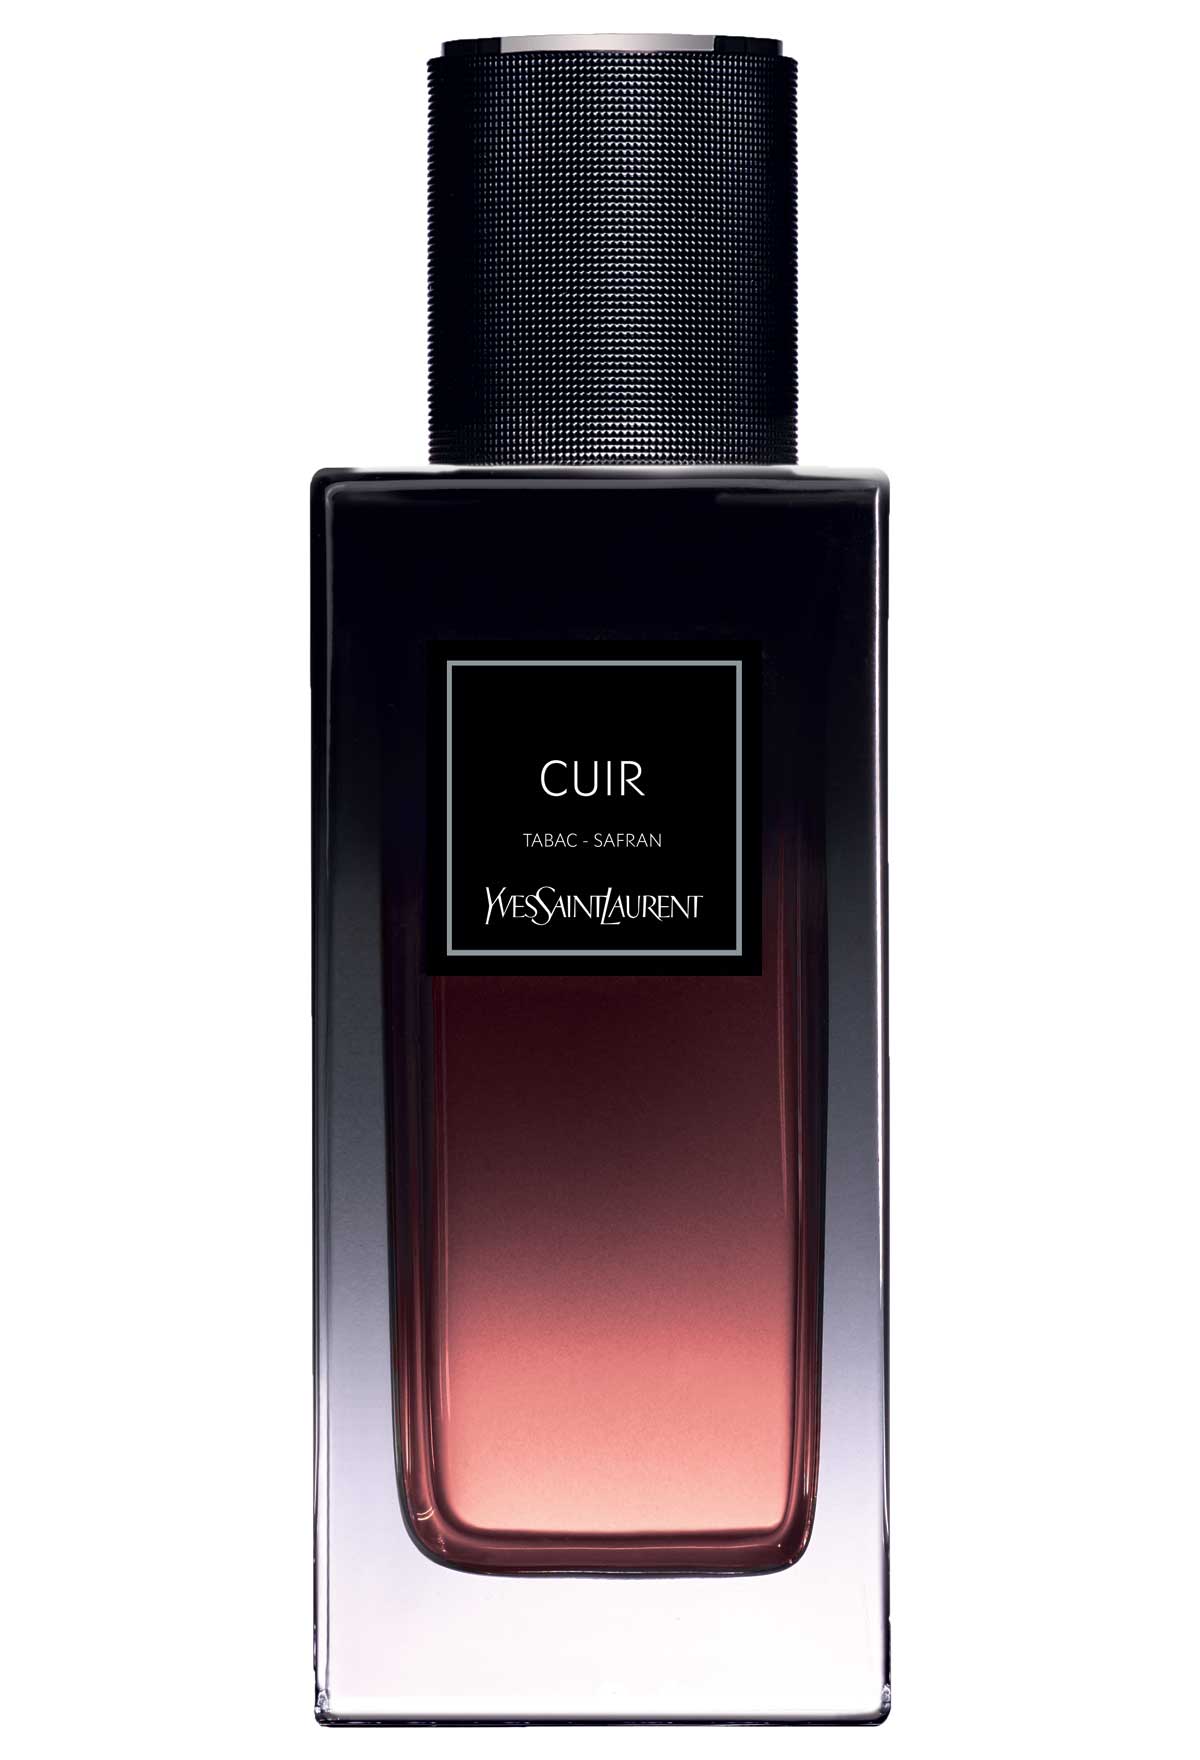 Cuir Yves Saint Laurent perfume - a new fragrance for women and men 2016